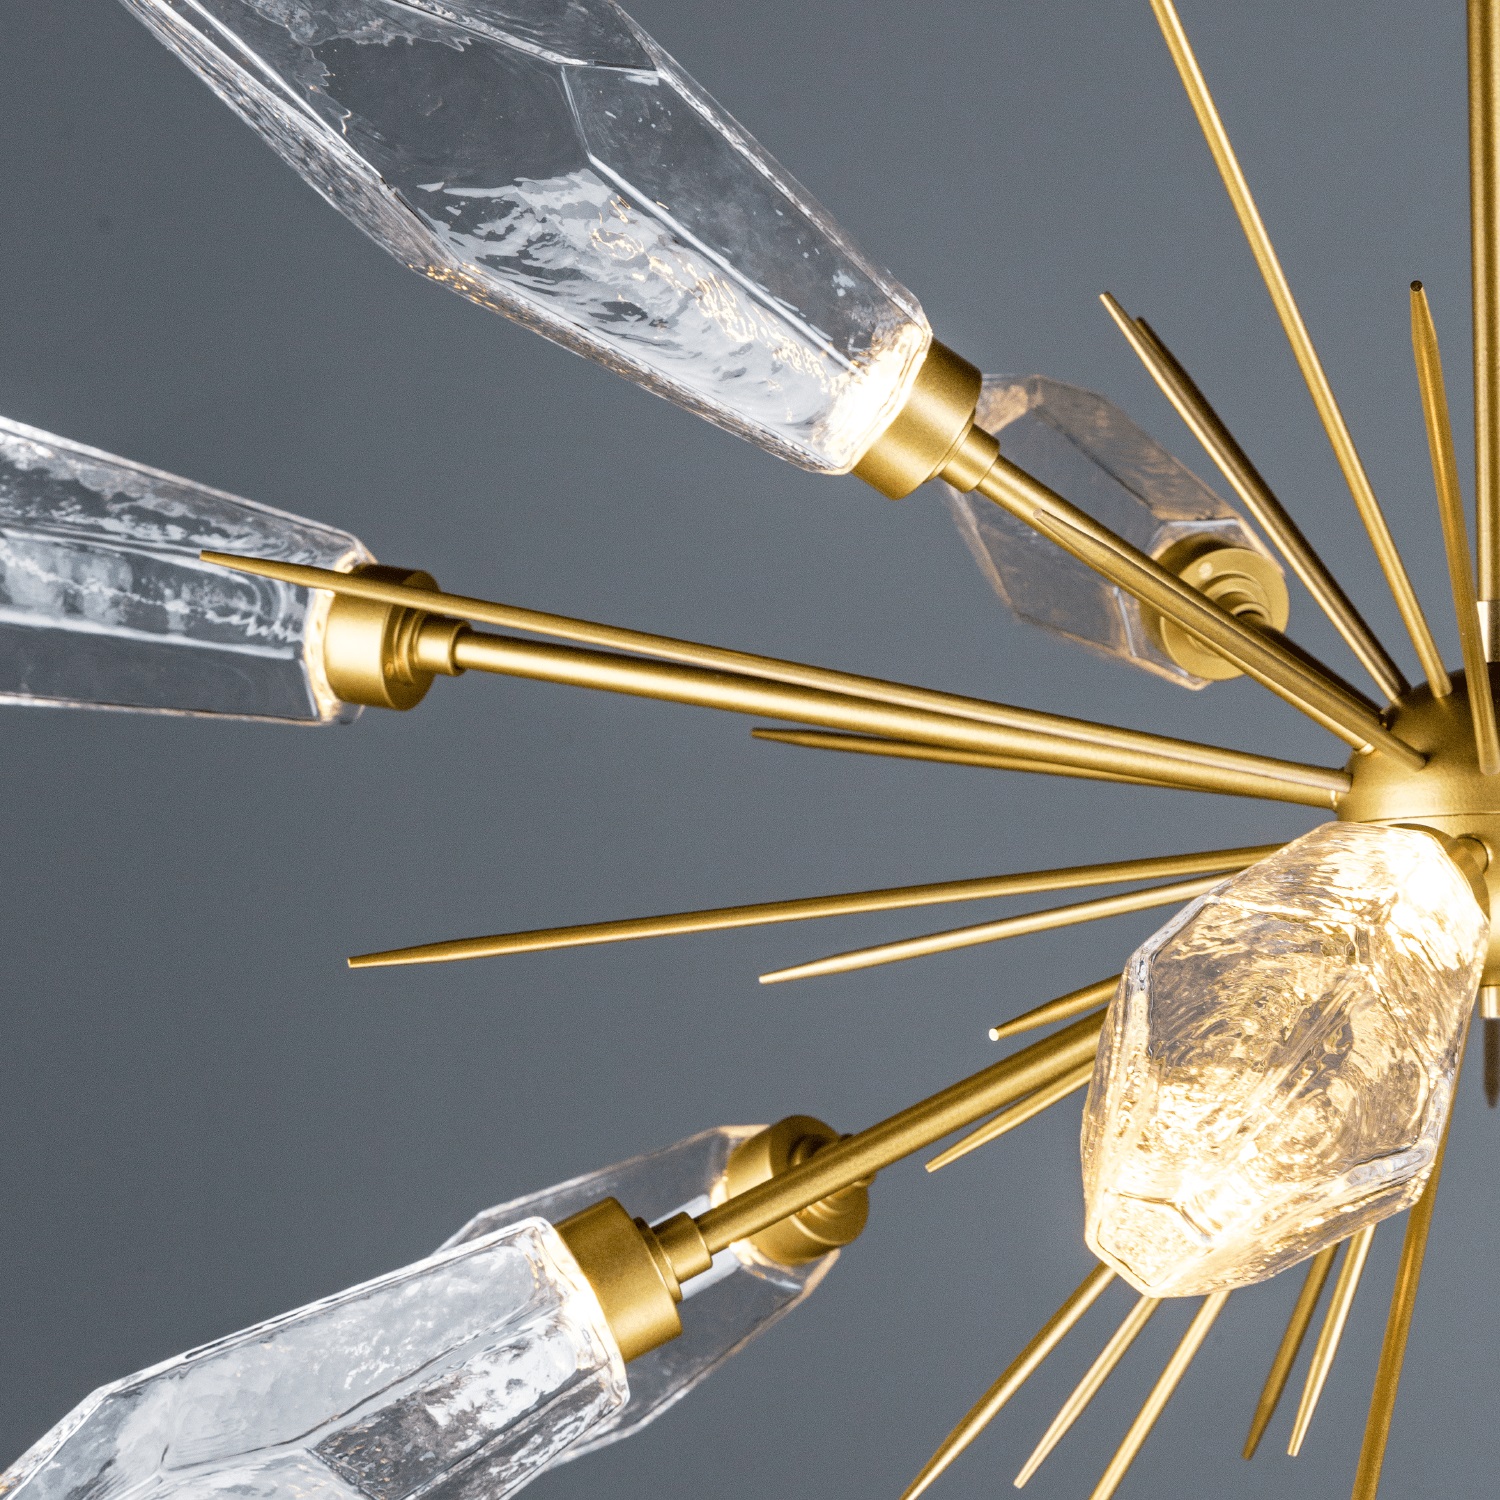 Closeup detail of a Hammerton Studio Rock Crystal starburst chandelier with brass finish and rock crystal-shaped glass light shades.